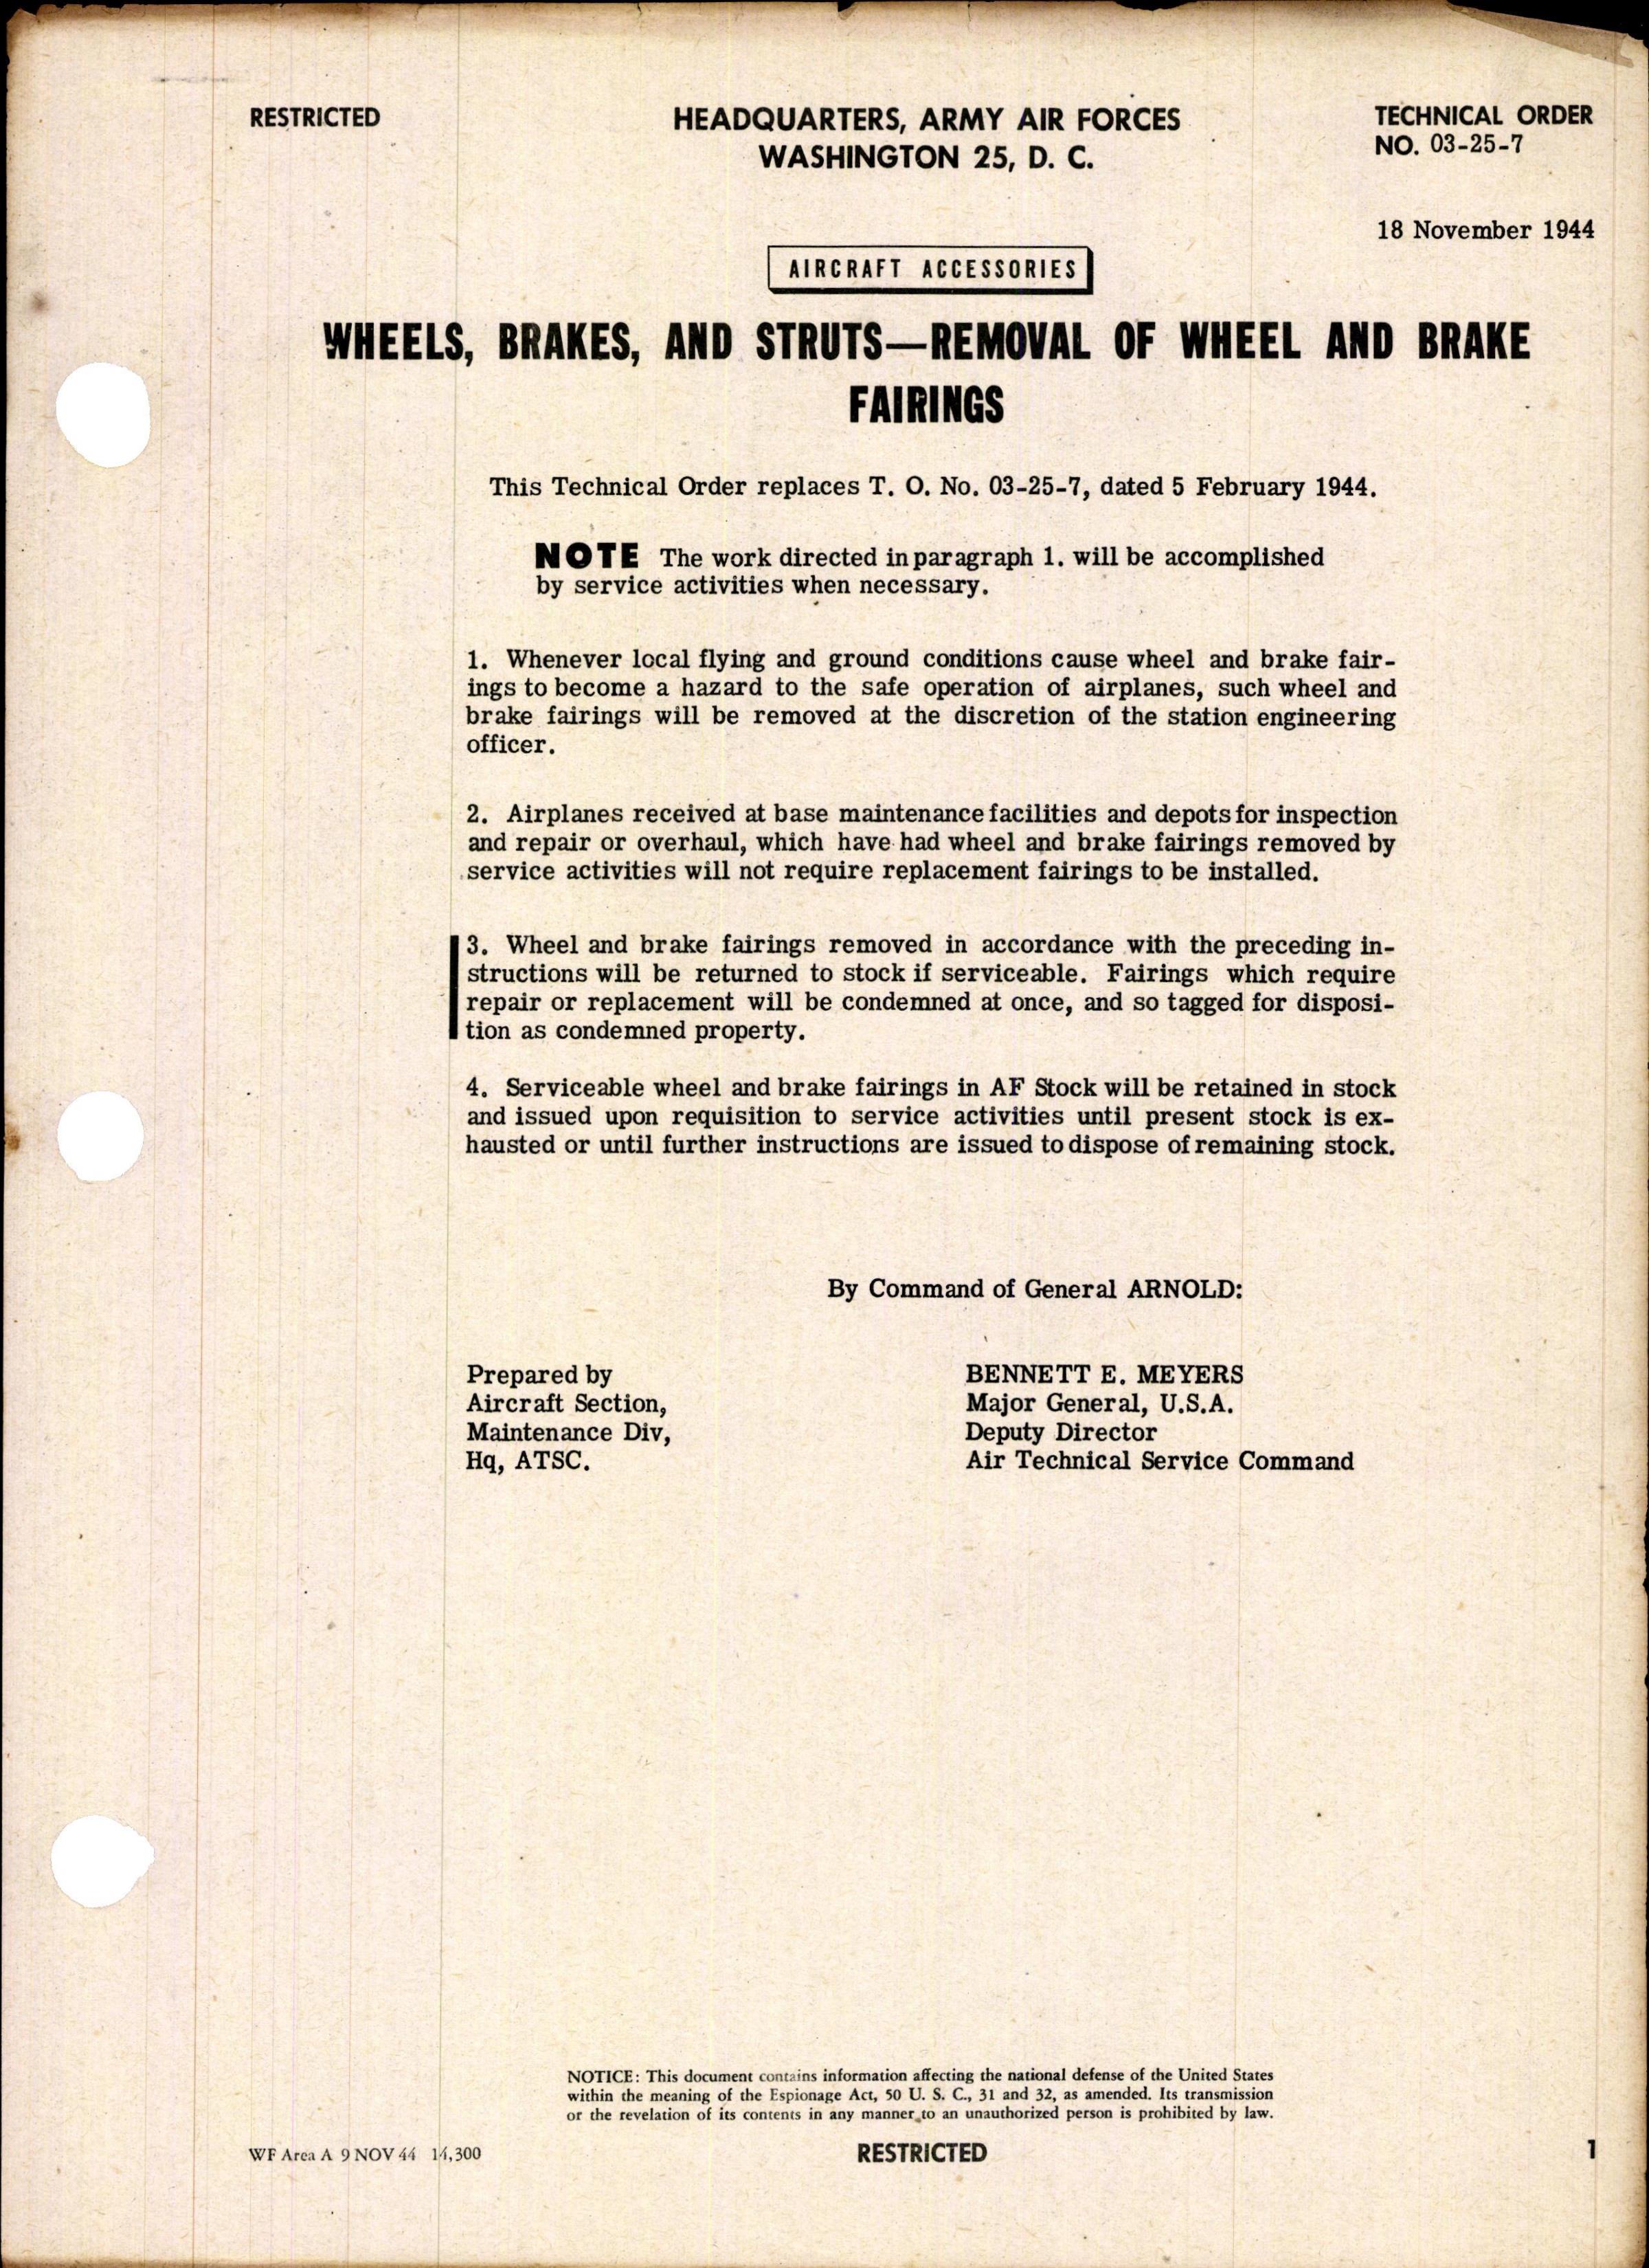 Sample page 1 from AirCorps Library document: Removal of Wheel and Brake Fairings